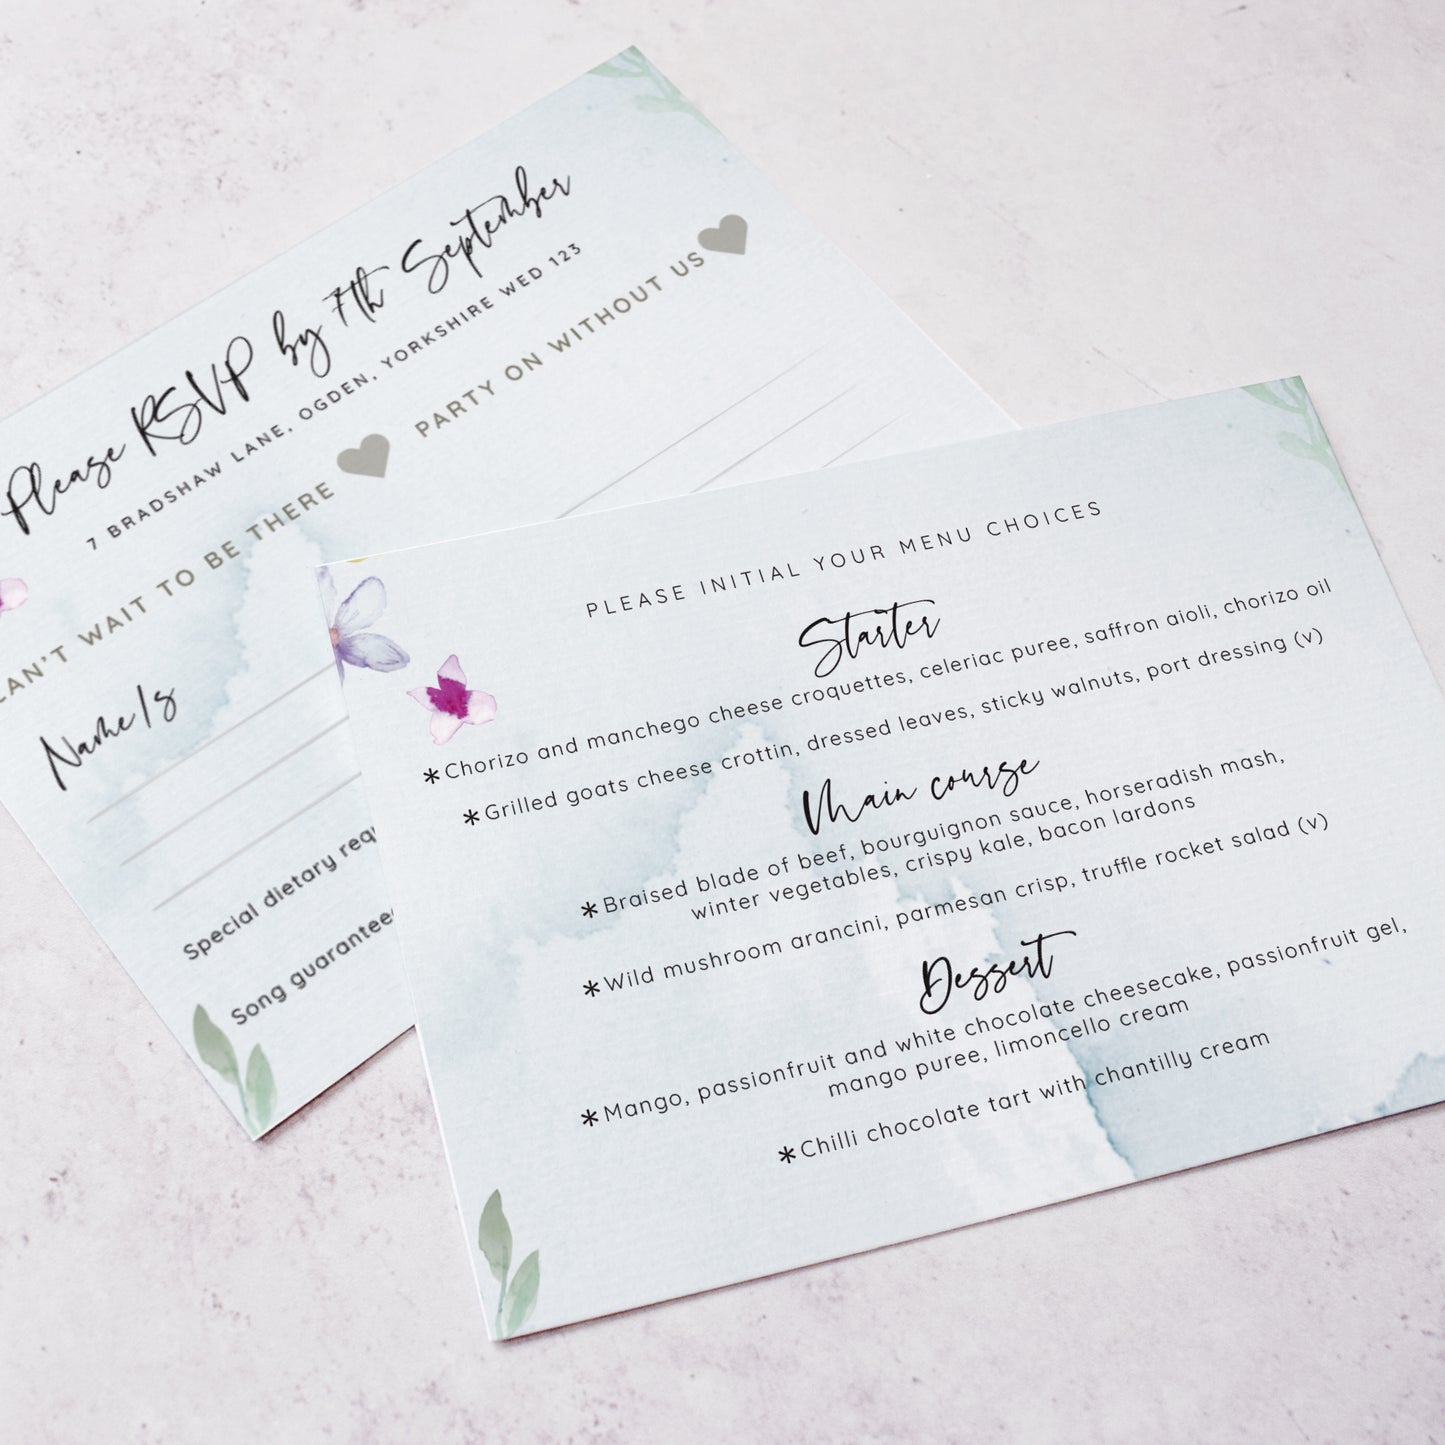 RSVP card featuring menu choices from our 'Flower Press Wreath' collection